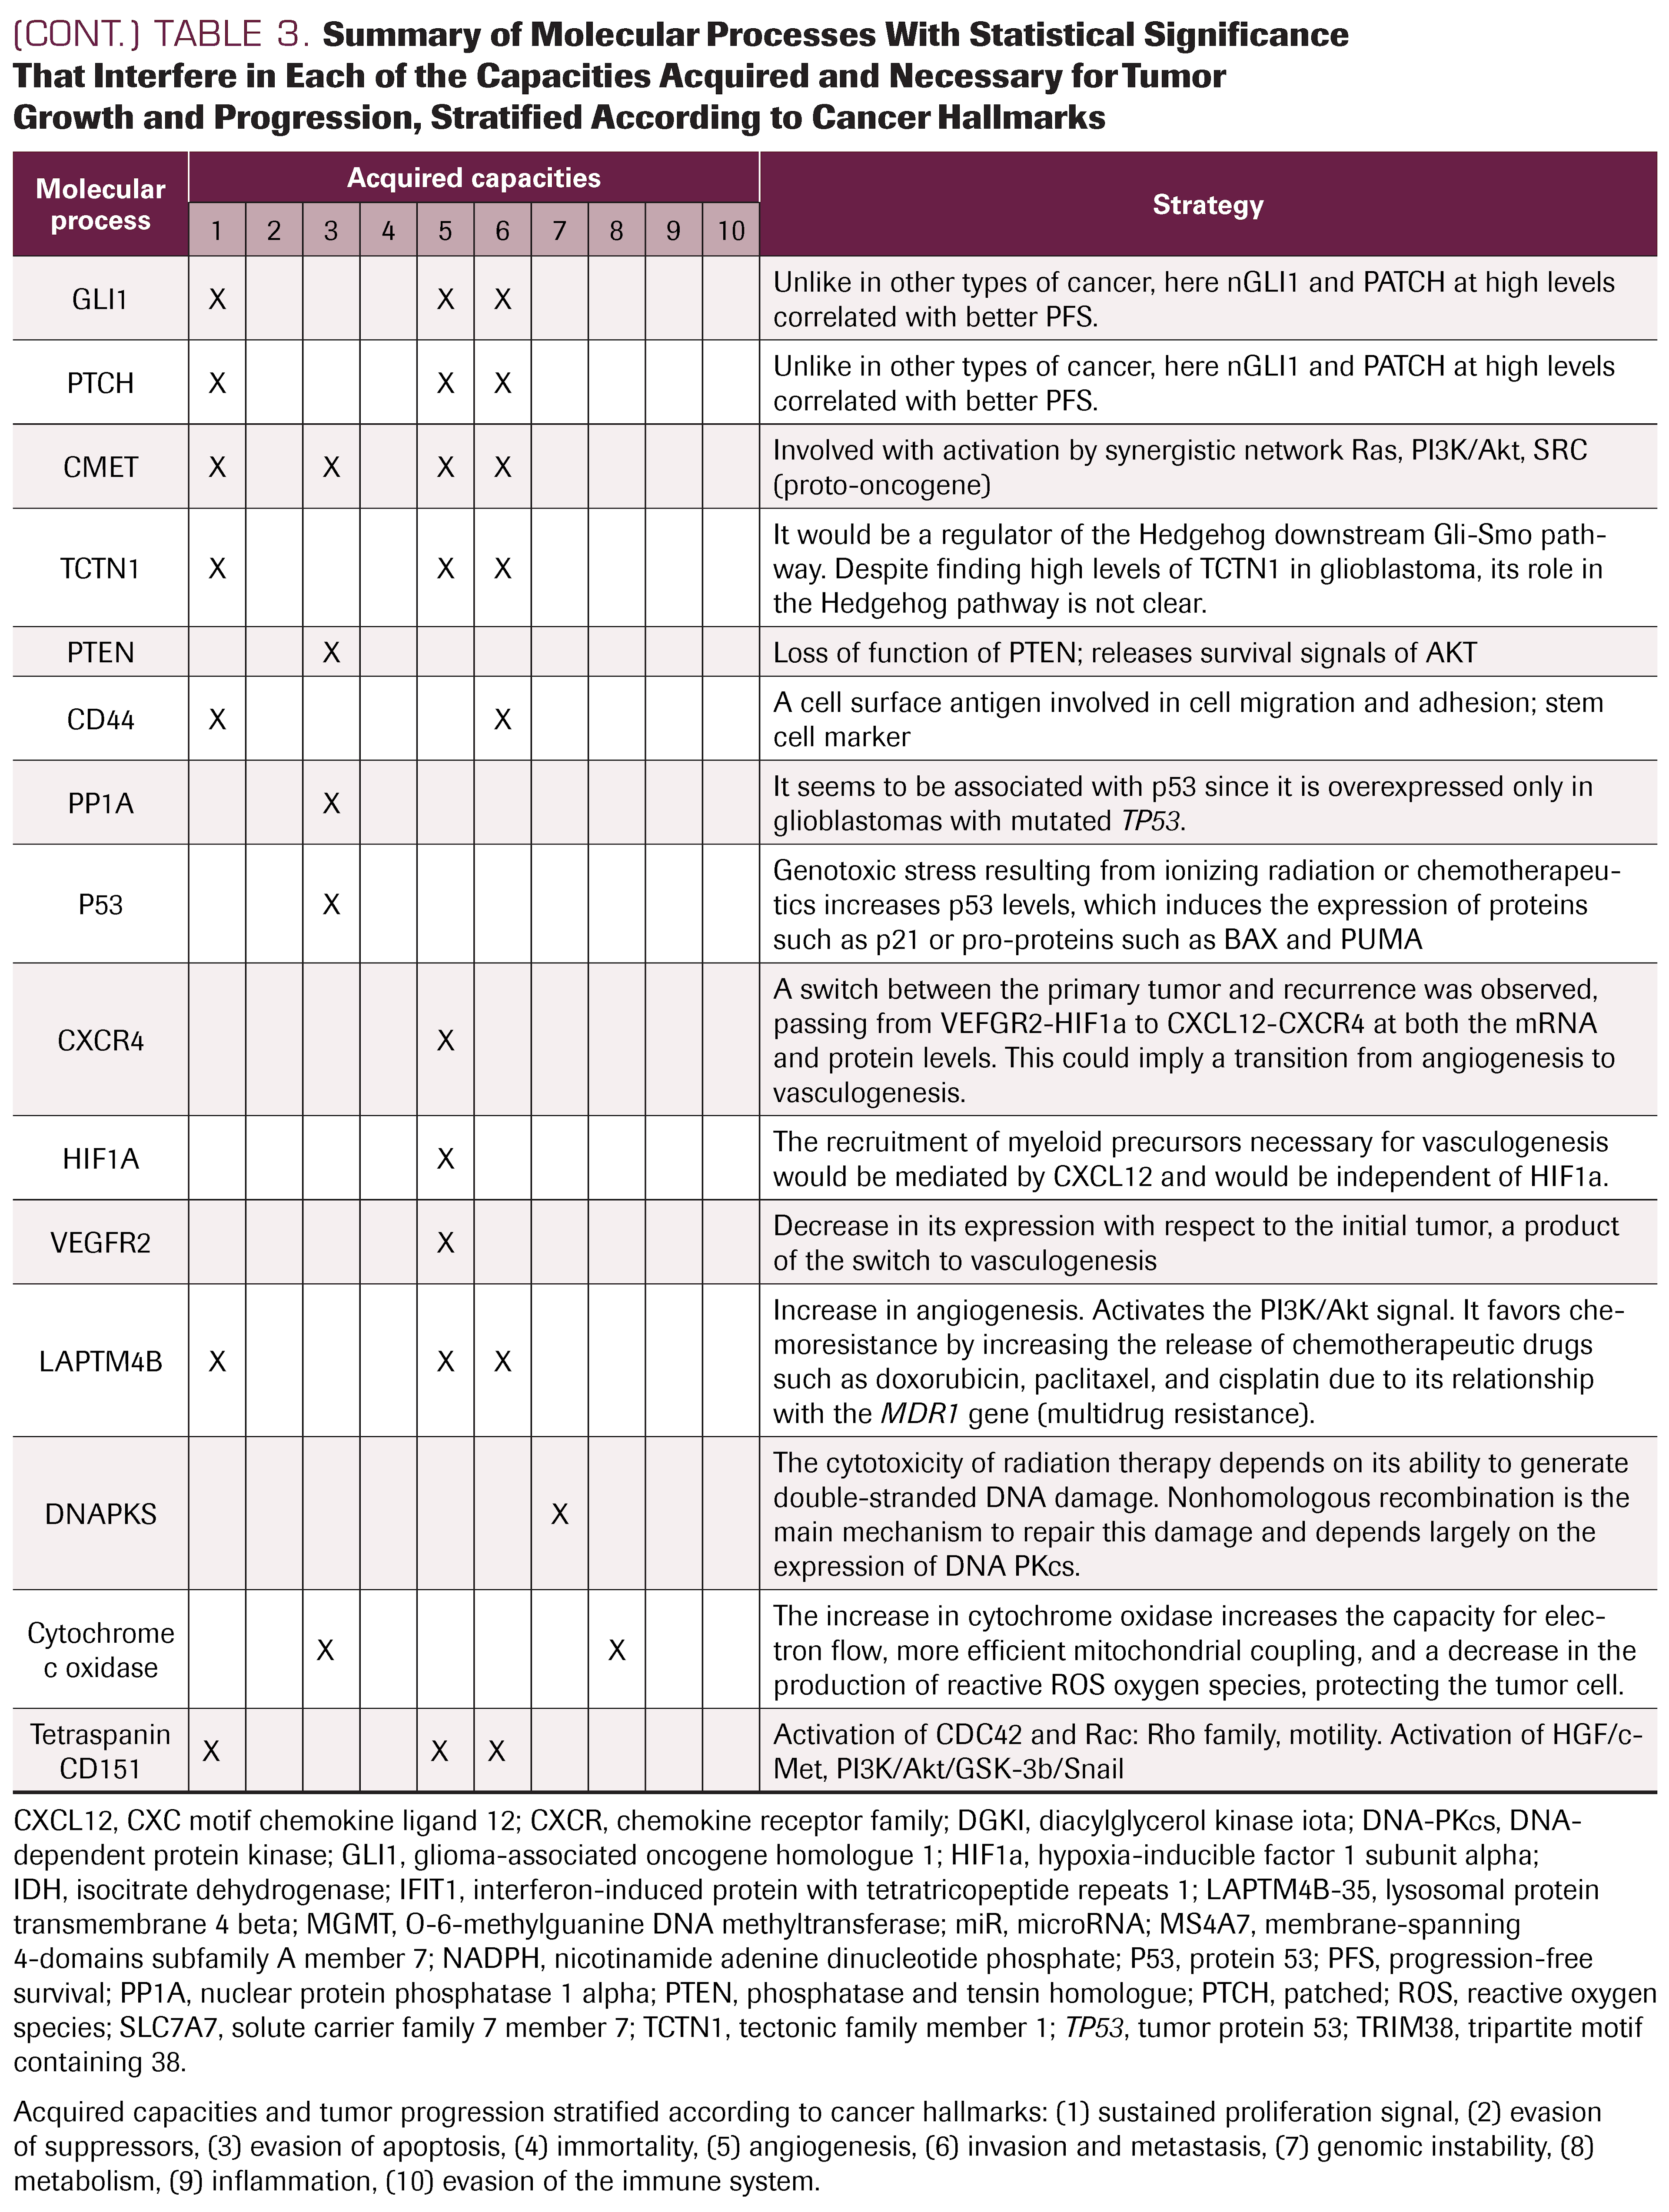 TABLE 3. Summary of Molecular Processes With Statistical Significance That Interfere in Each of the Capacities Acquired and Necessary for Tumor Growth and Progression, Stratified According to Cancer Hallmarks